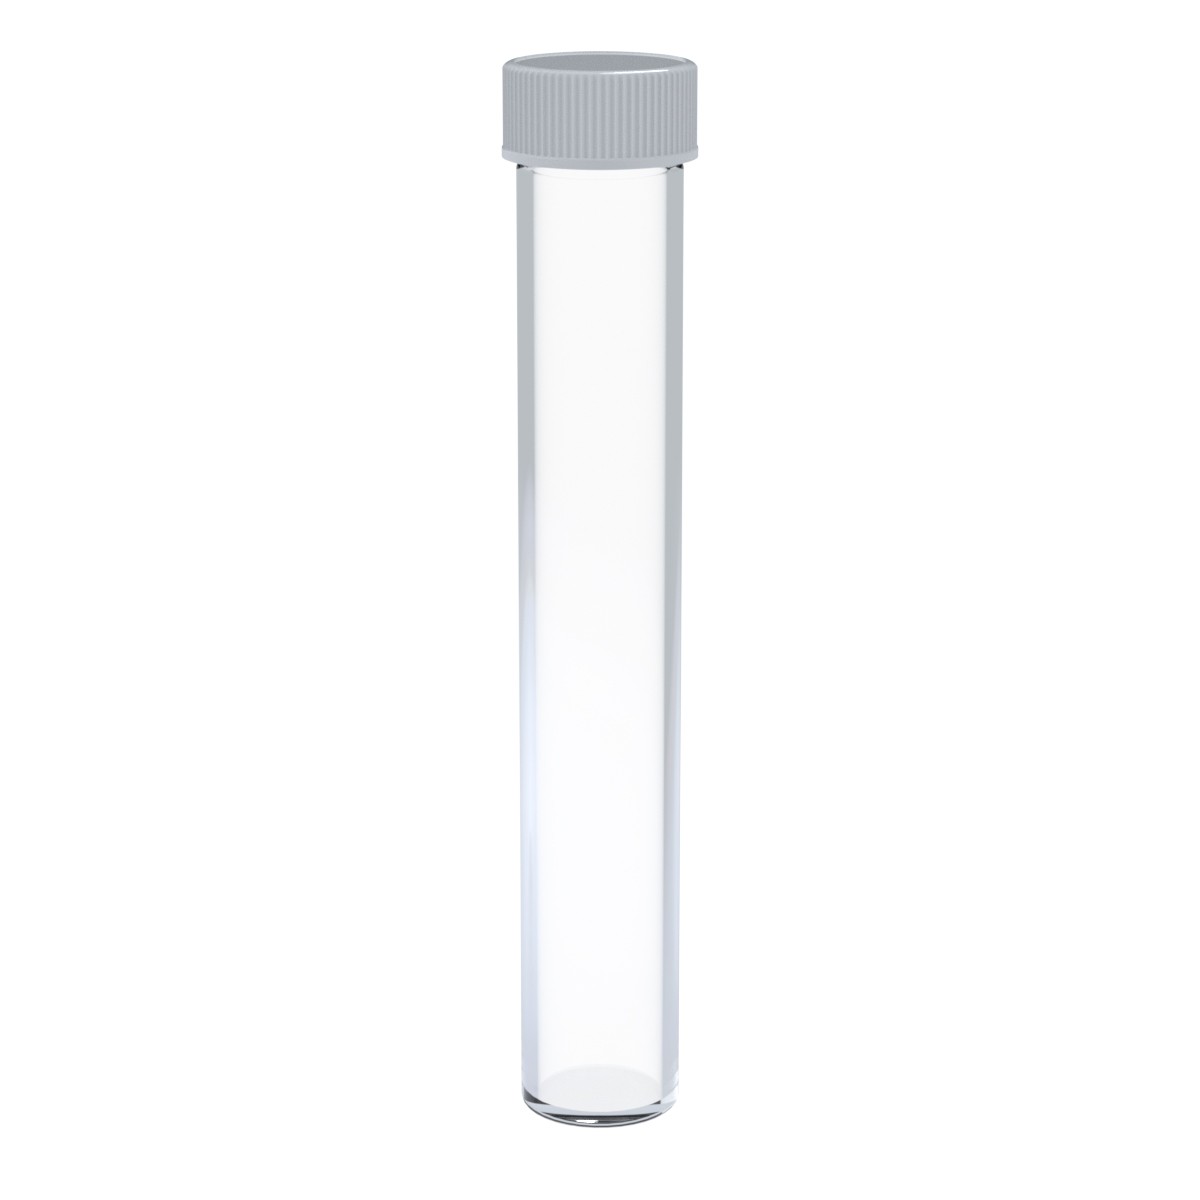 Child Resistant | Pop Top Plastic Pre-Roll Tubes | 78mm - Clear - 1200 Count